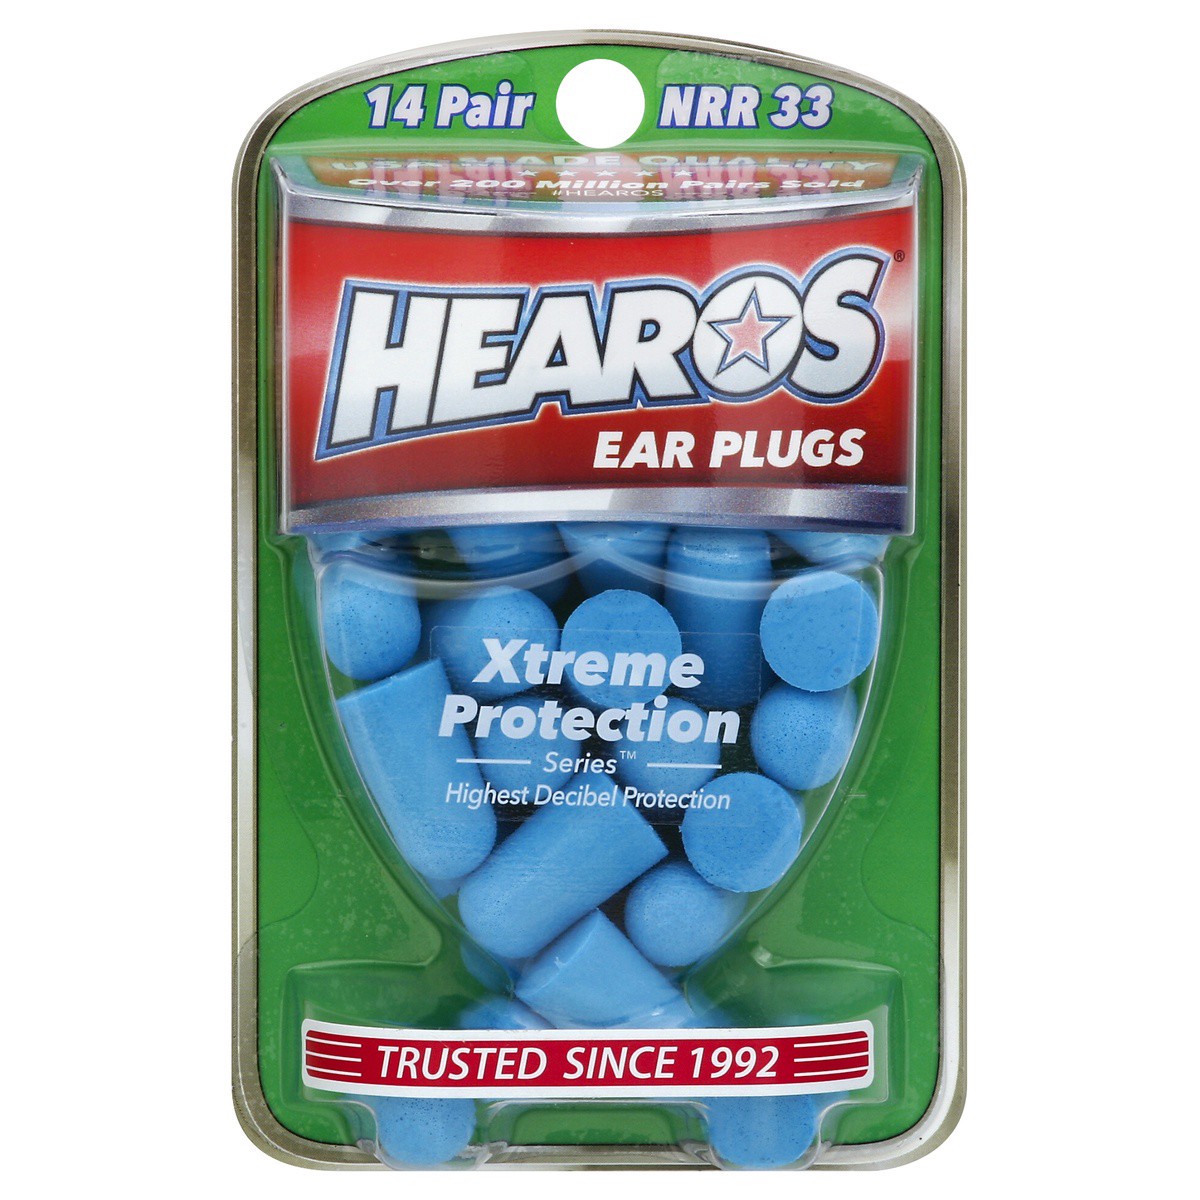 slide 1 of 2, HEAROS Xtreme Protection Series Ear Plugs, 14 pair